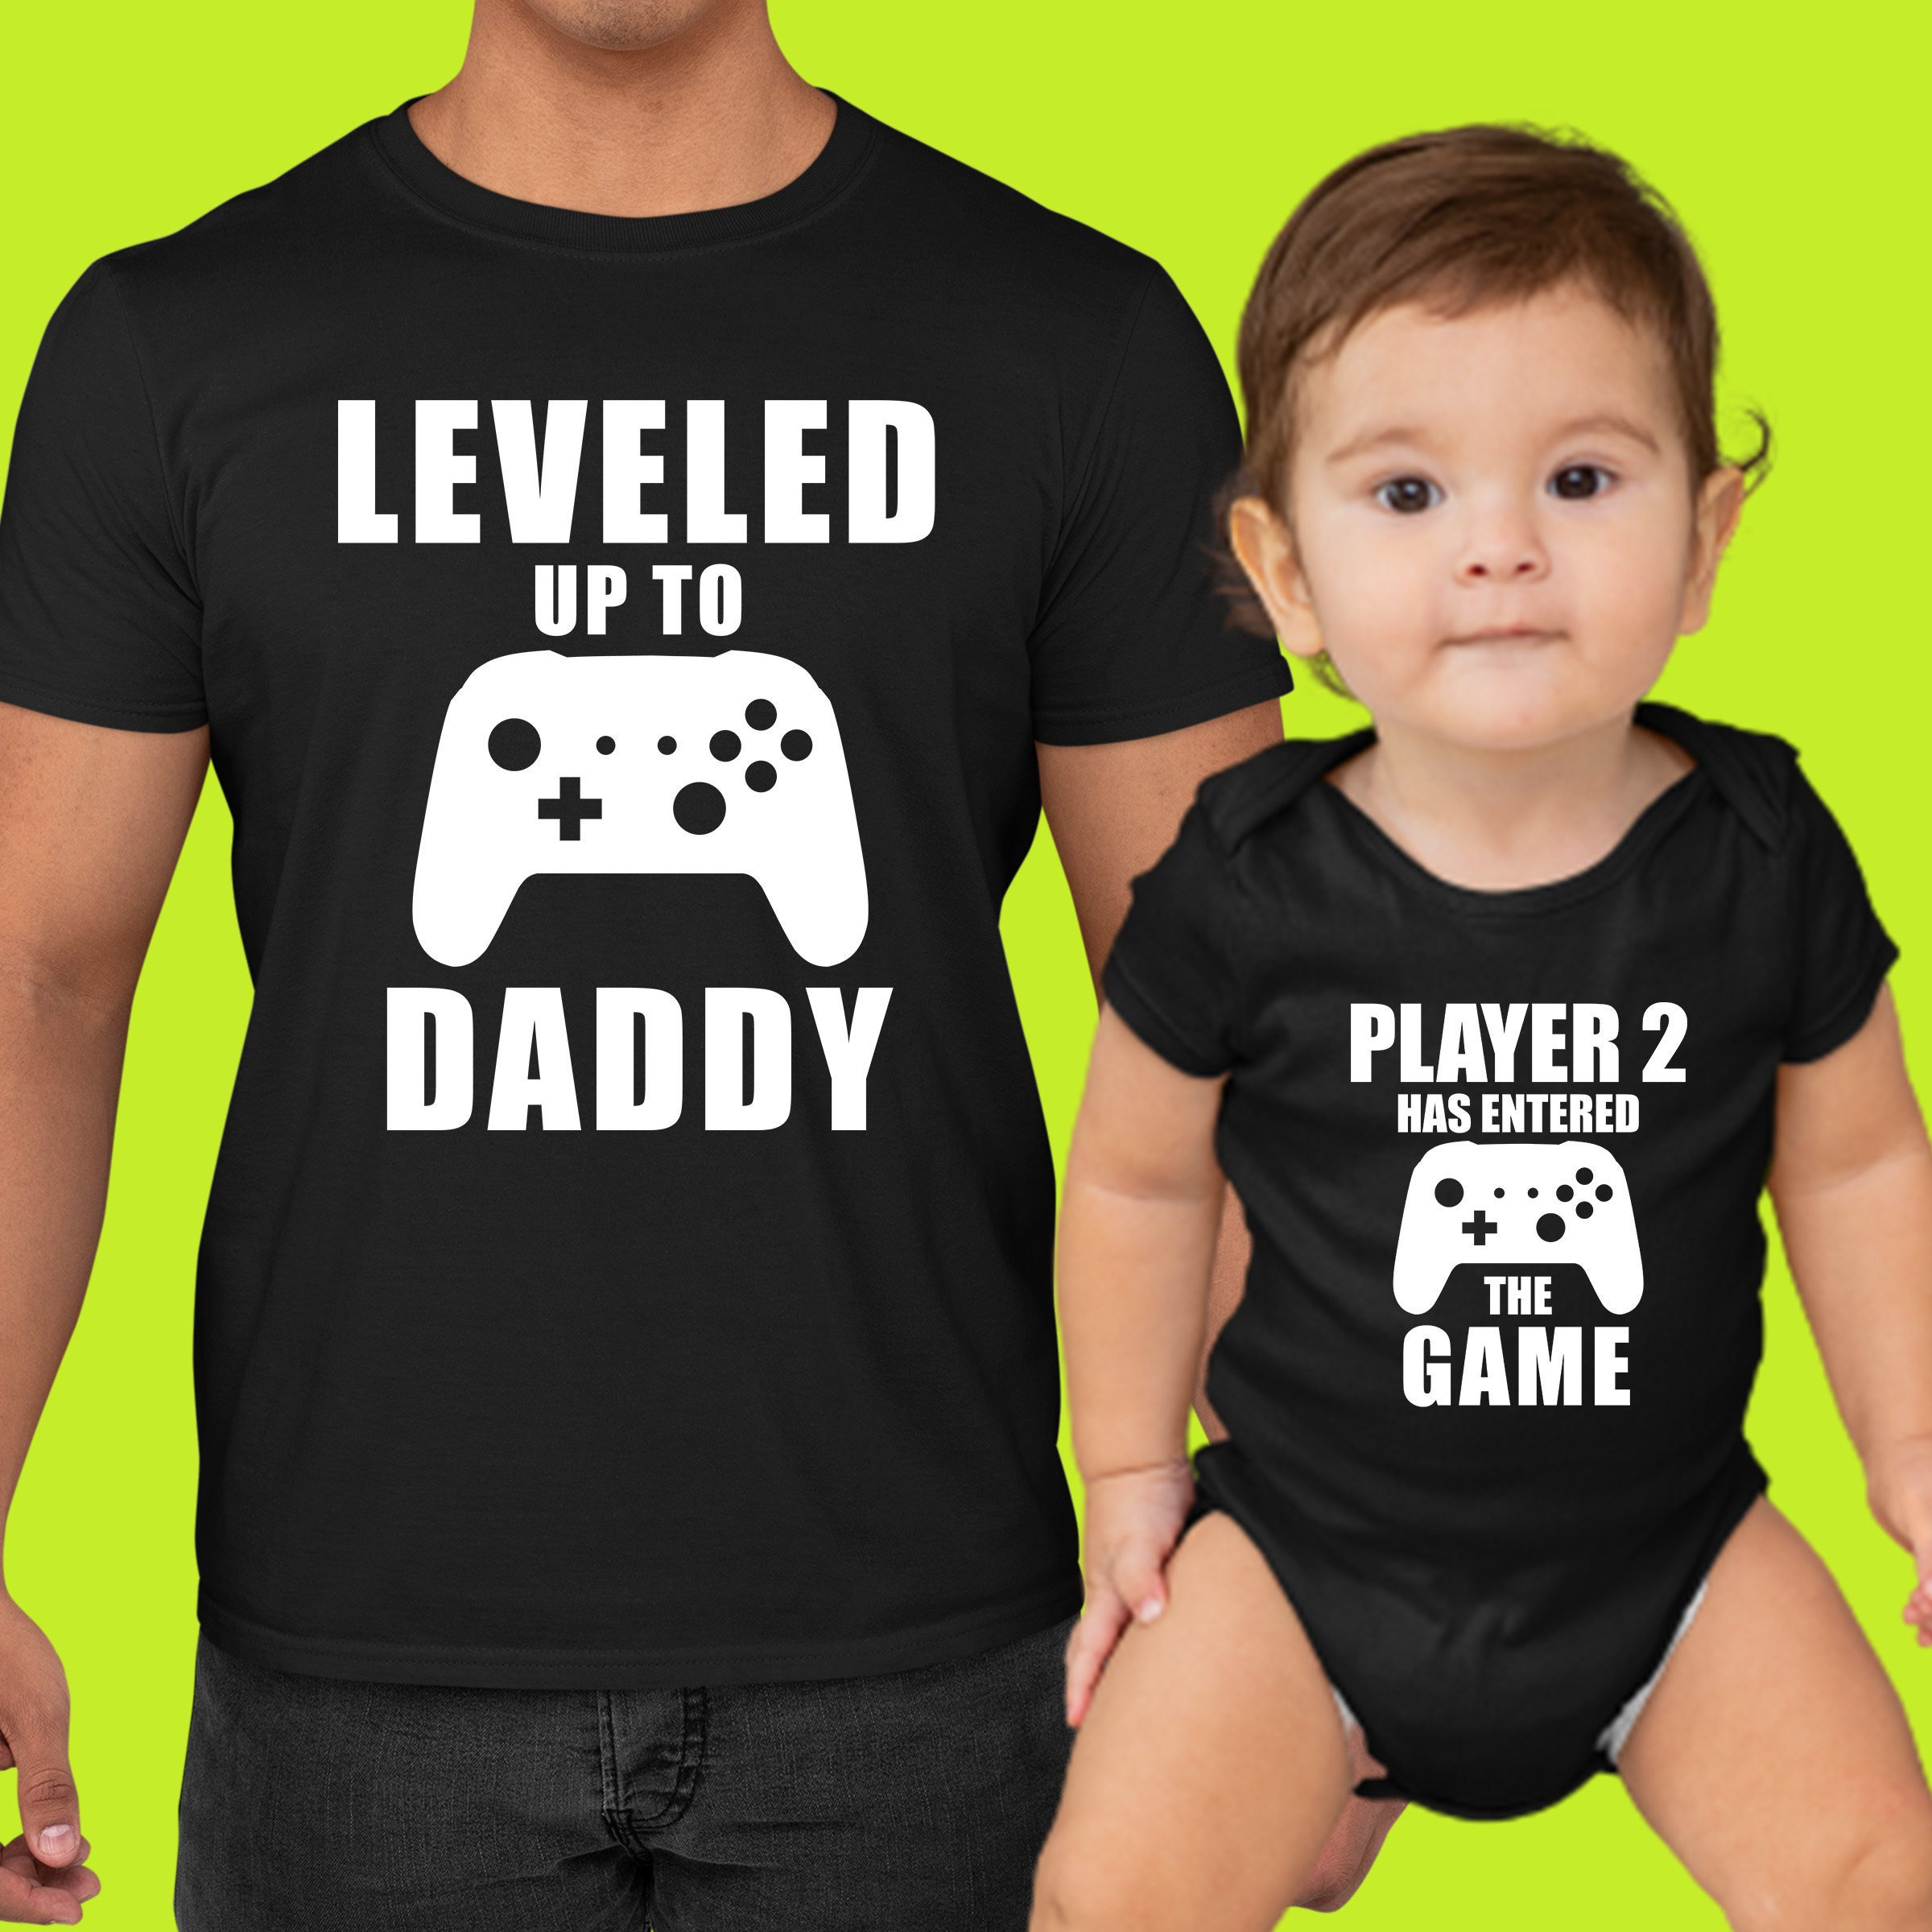 Leveled Up Shirt Dad & Son Matching T-Shirts Father’s Day Baby Announcement Gift For New & Matching Shirts